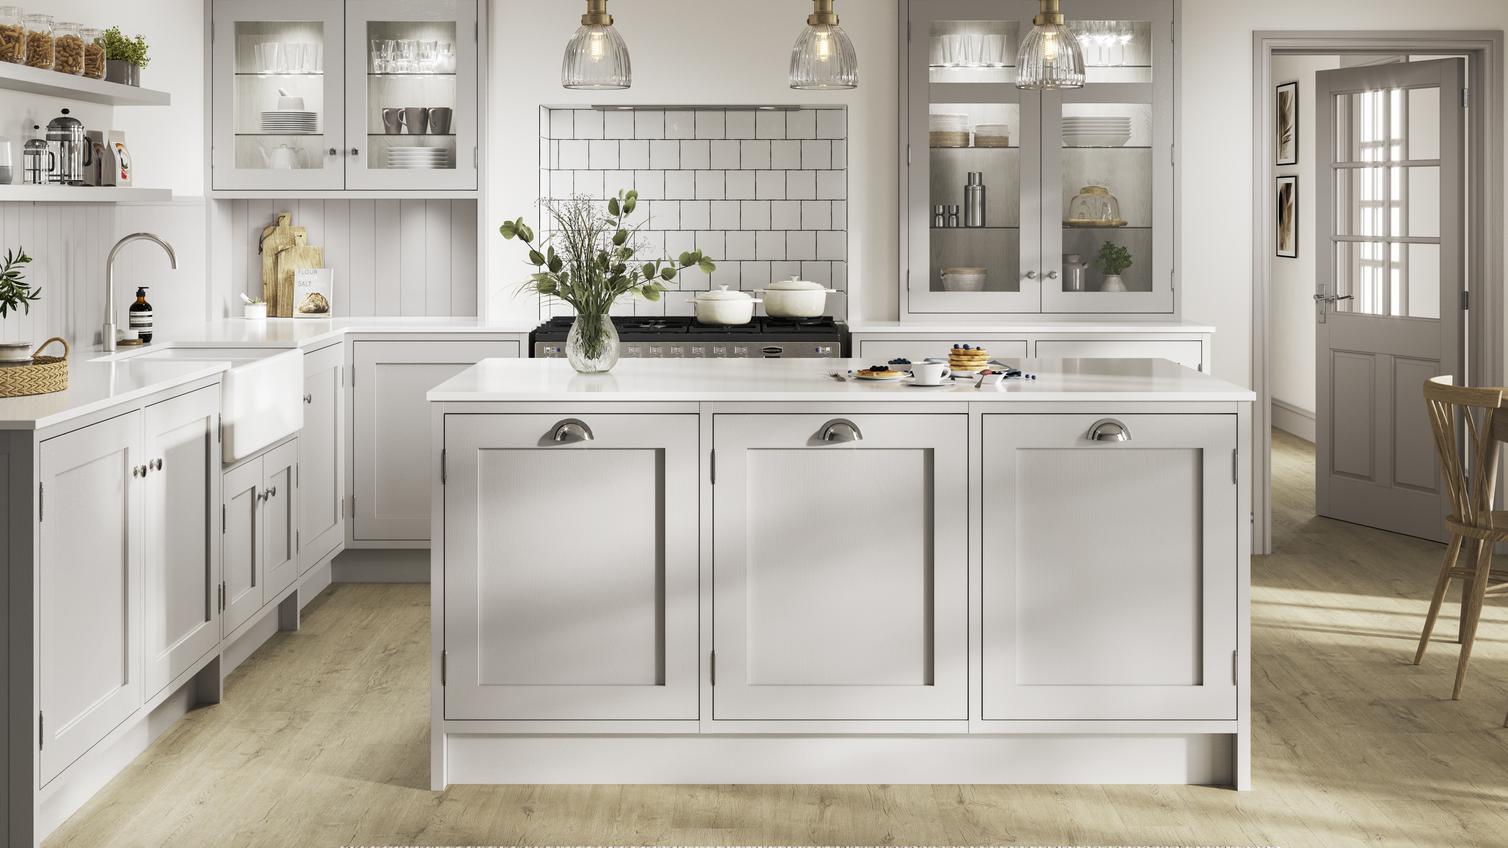 Grey shaker kitchen with an in-frame design in an island layout. Contains exposed hinges, chrome handles, and white worktops